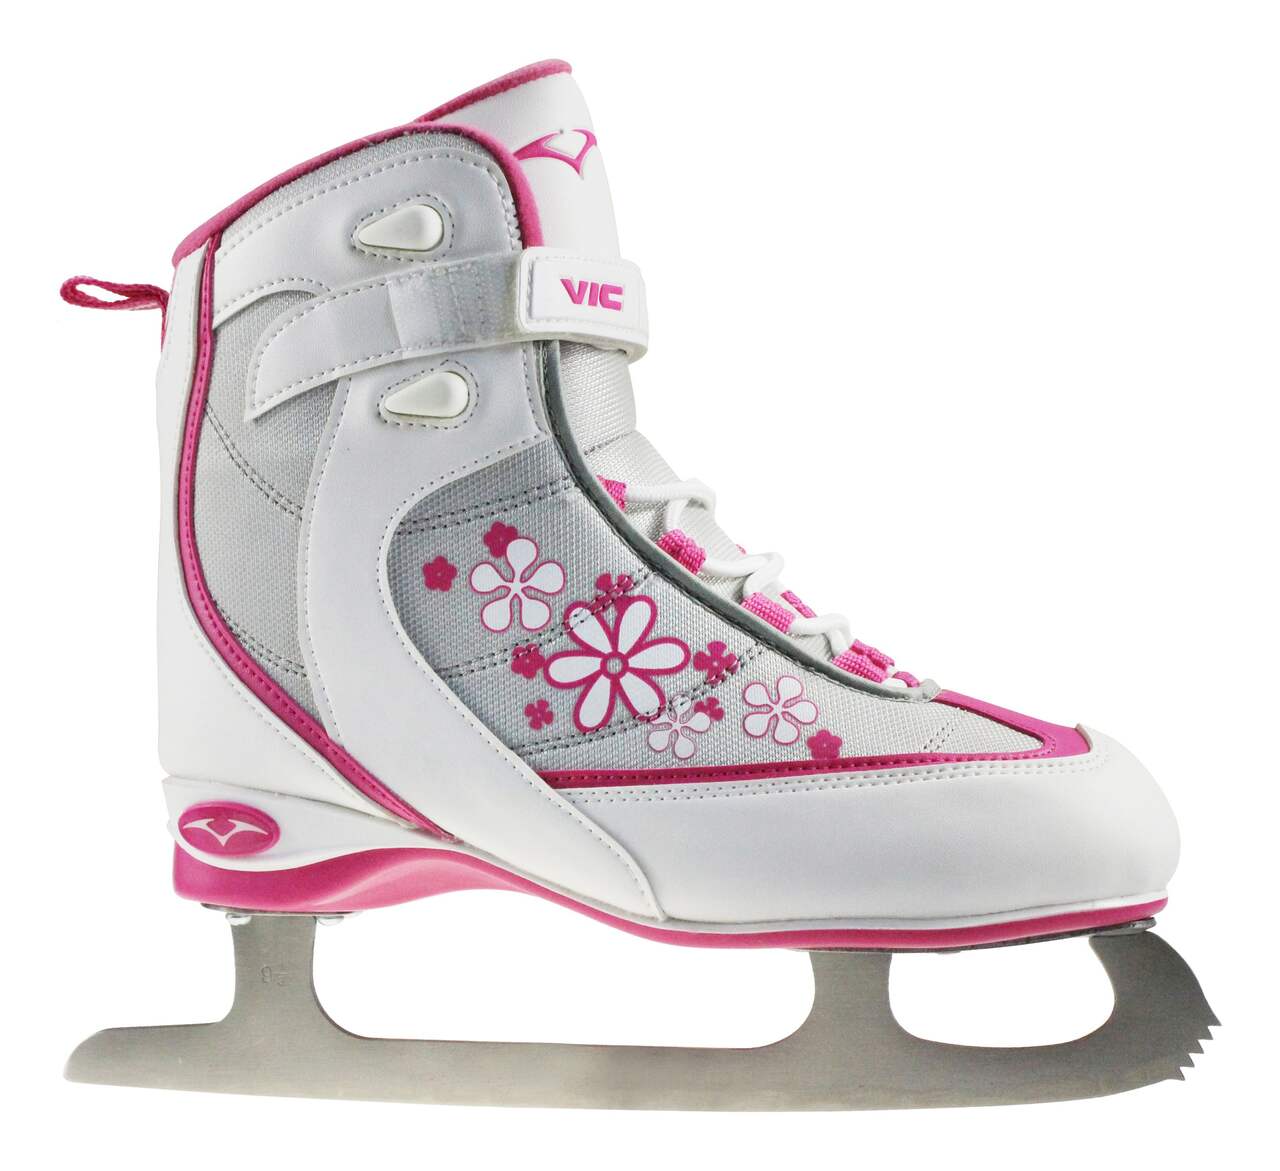 VIC Frost Recreational Ice Skates, Youth, White/Pink, Assorted Sizes